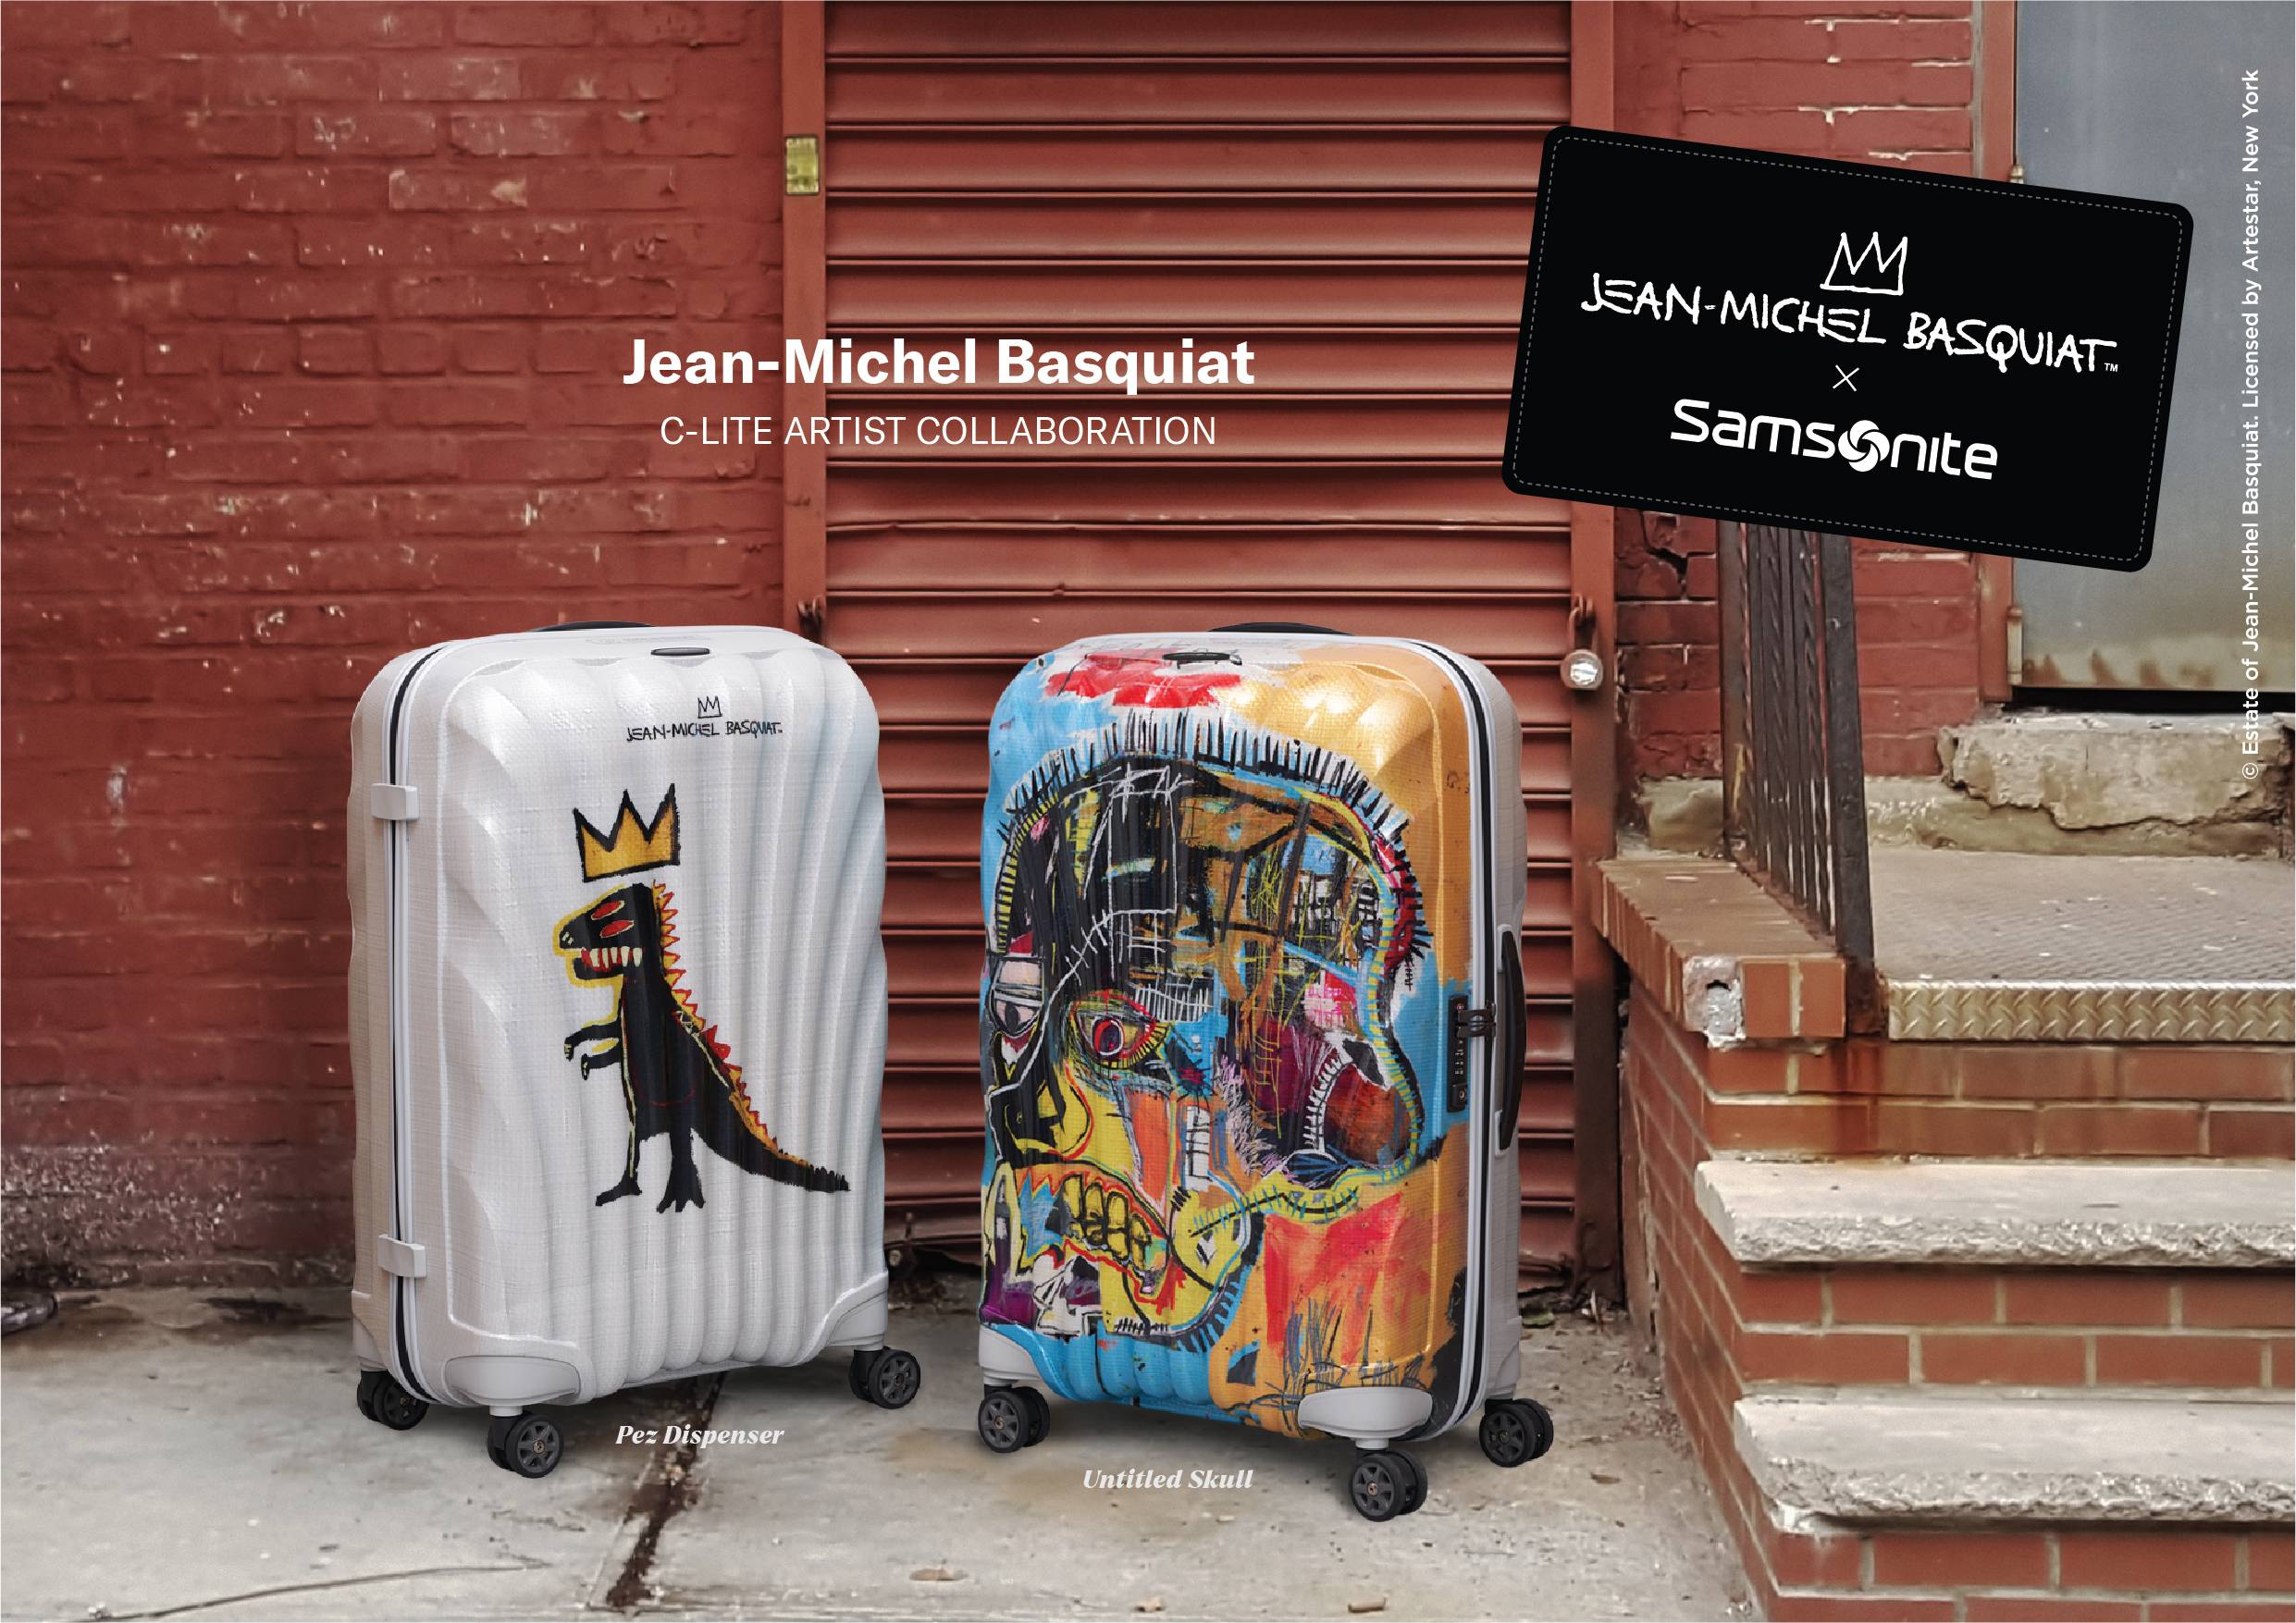 samsonite x jean-michel basquiat luggage pieces modeled in the street